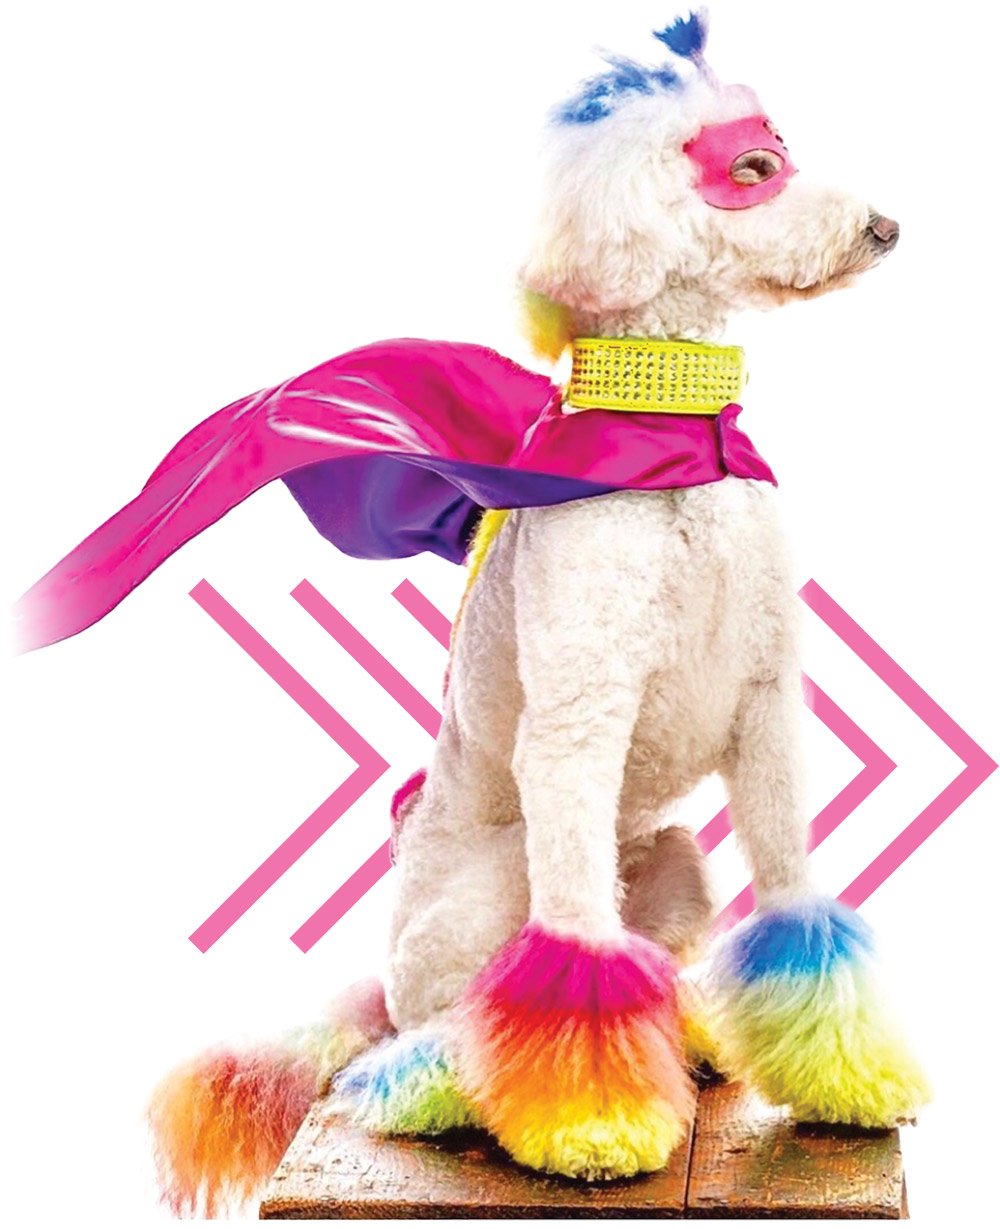 a white standard poodle with rainbow hair cuffs photographed atop a table and wearing a pink super hero mask, a vibrant yellow rhinestone collar and a flowing pink and purple cape